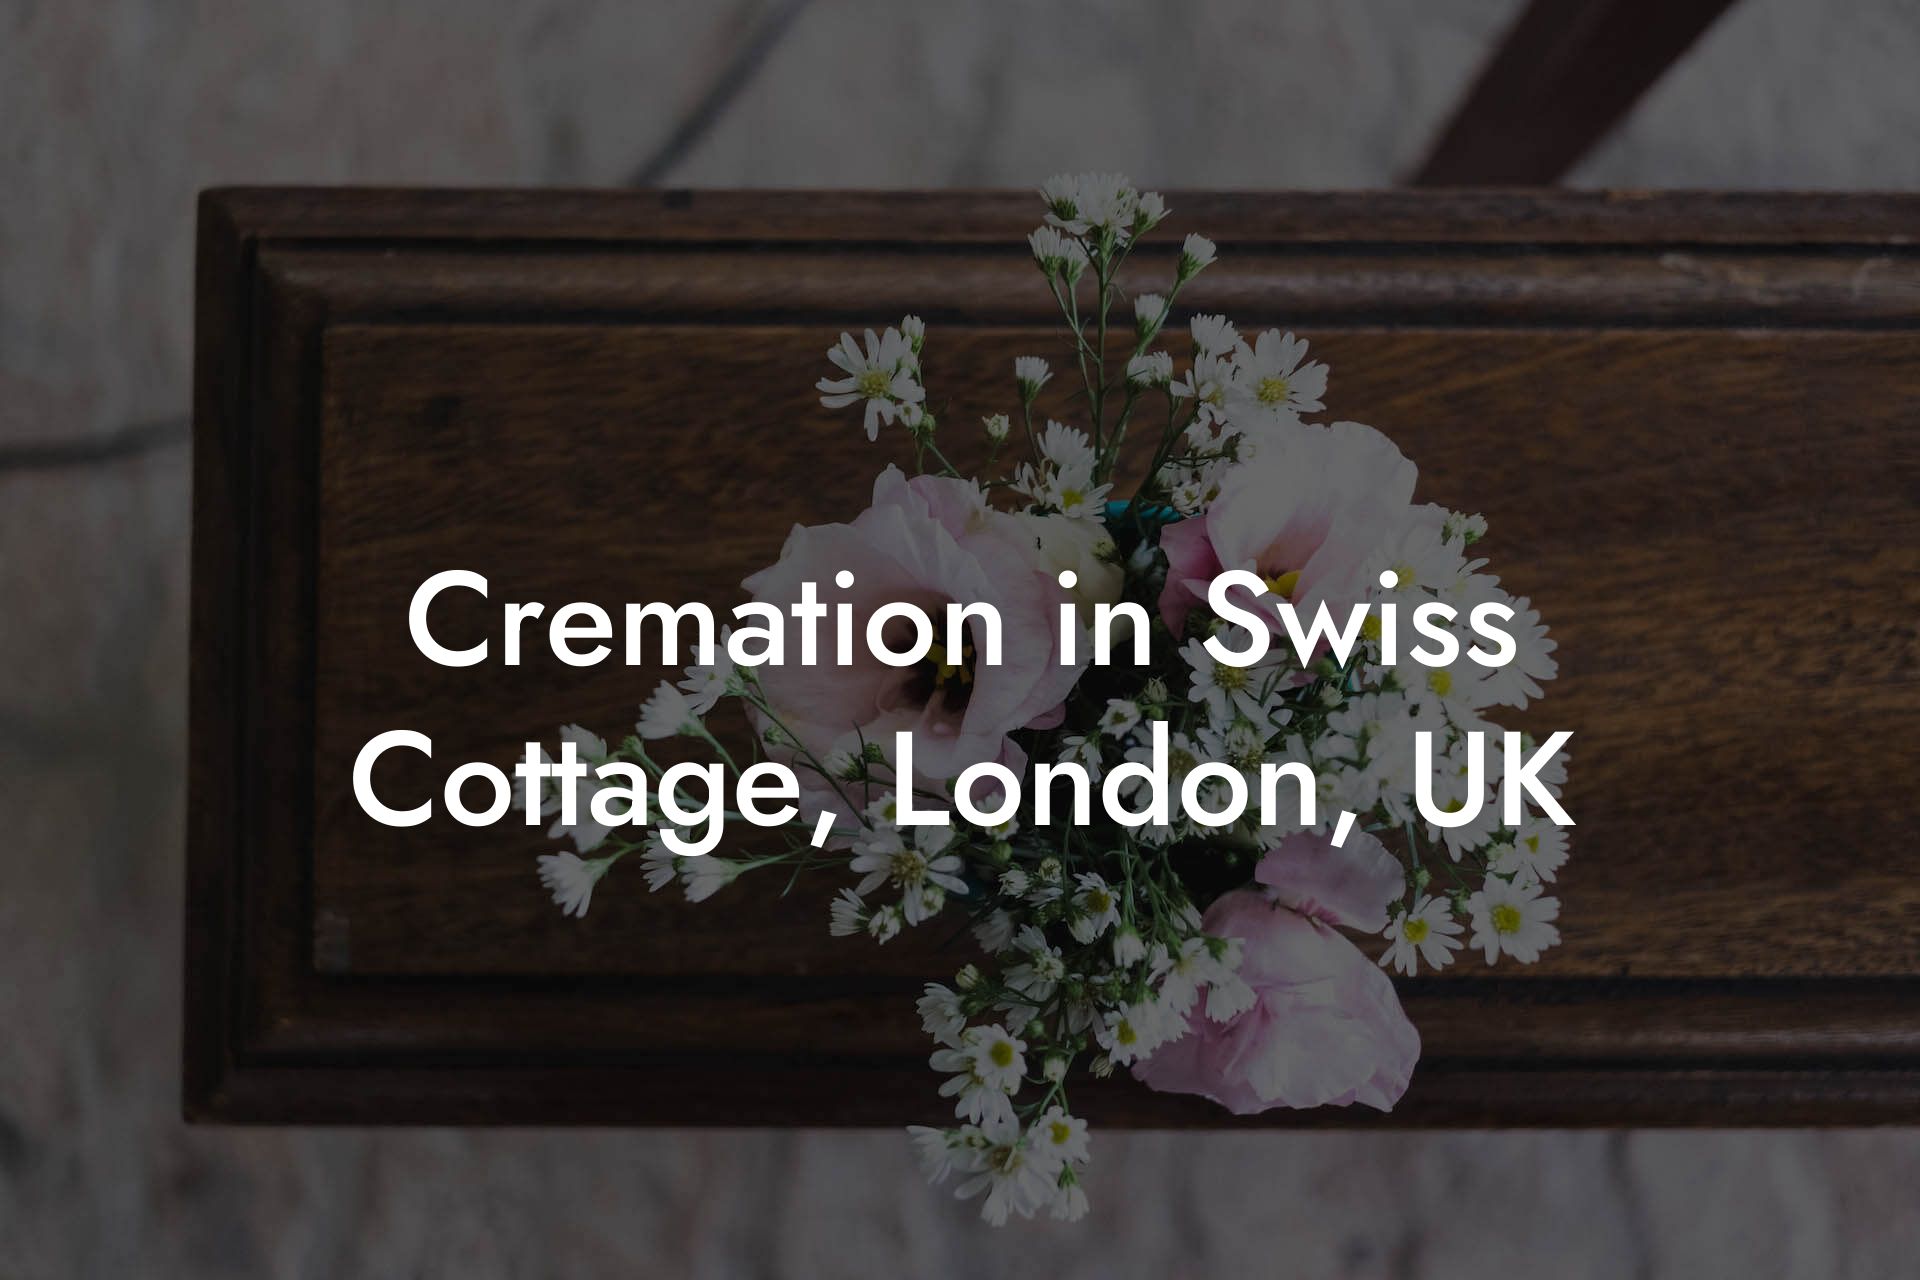 Cremation in Swiss Cottage, London, UK